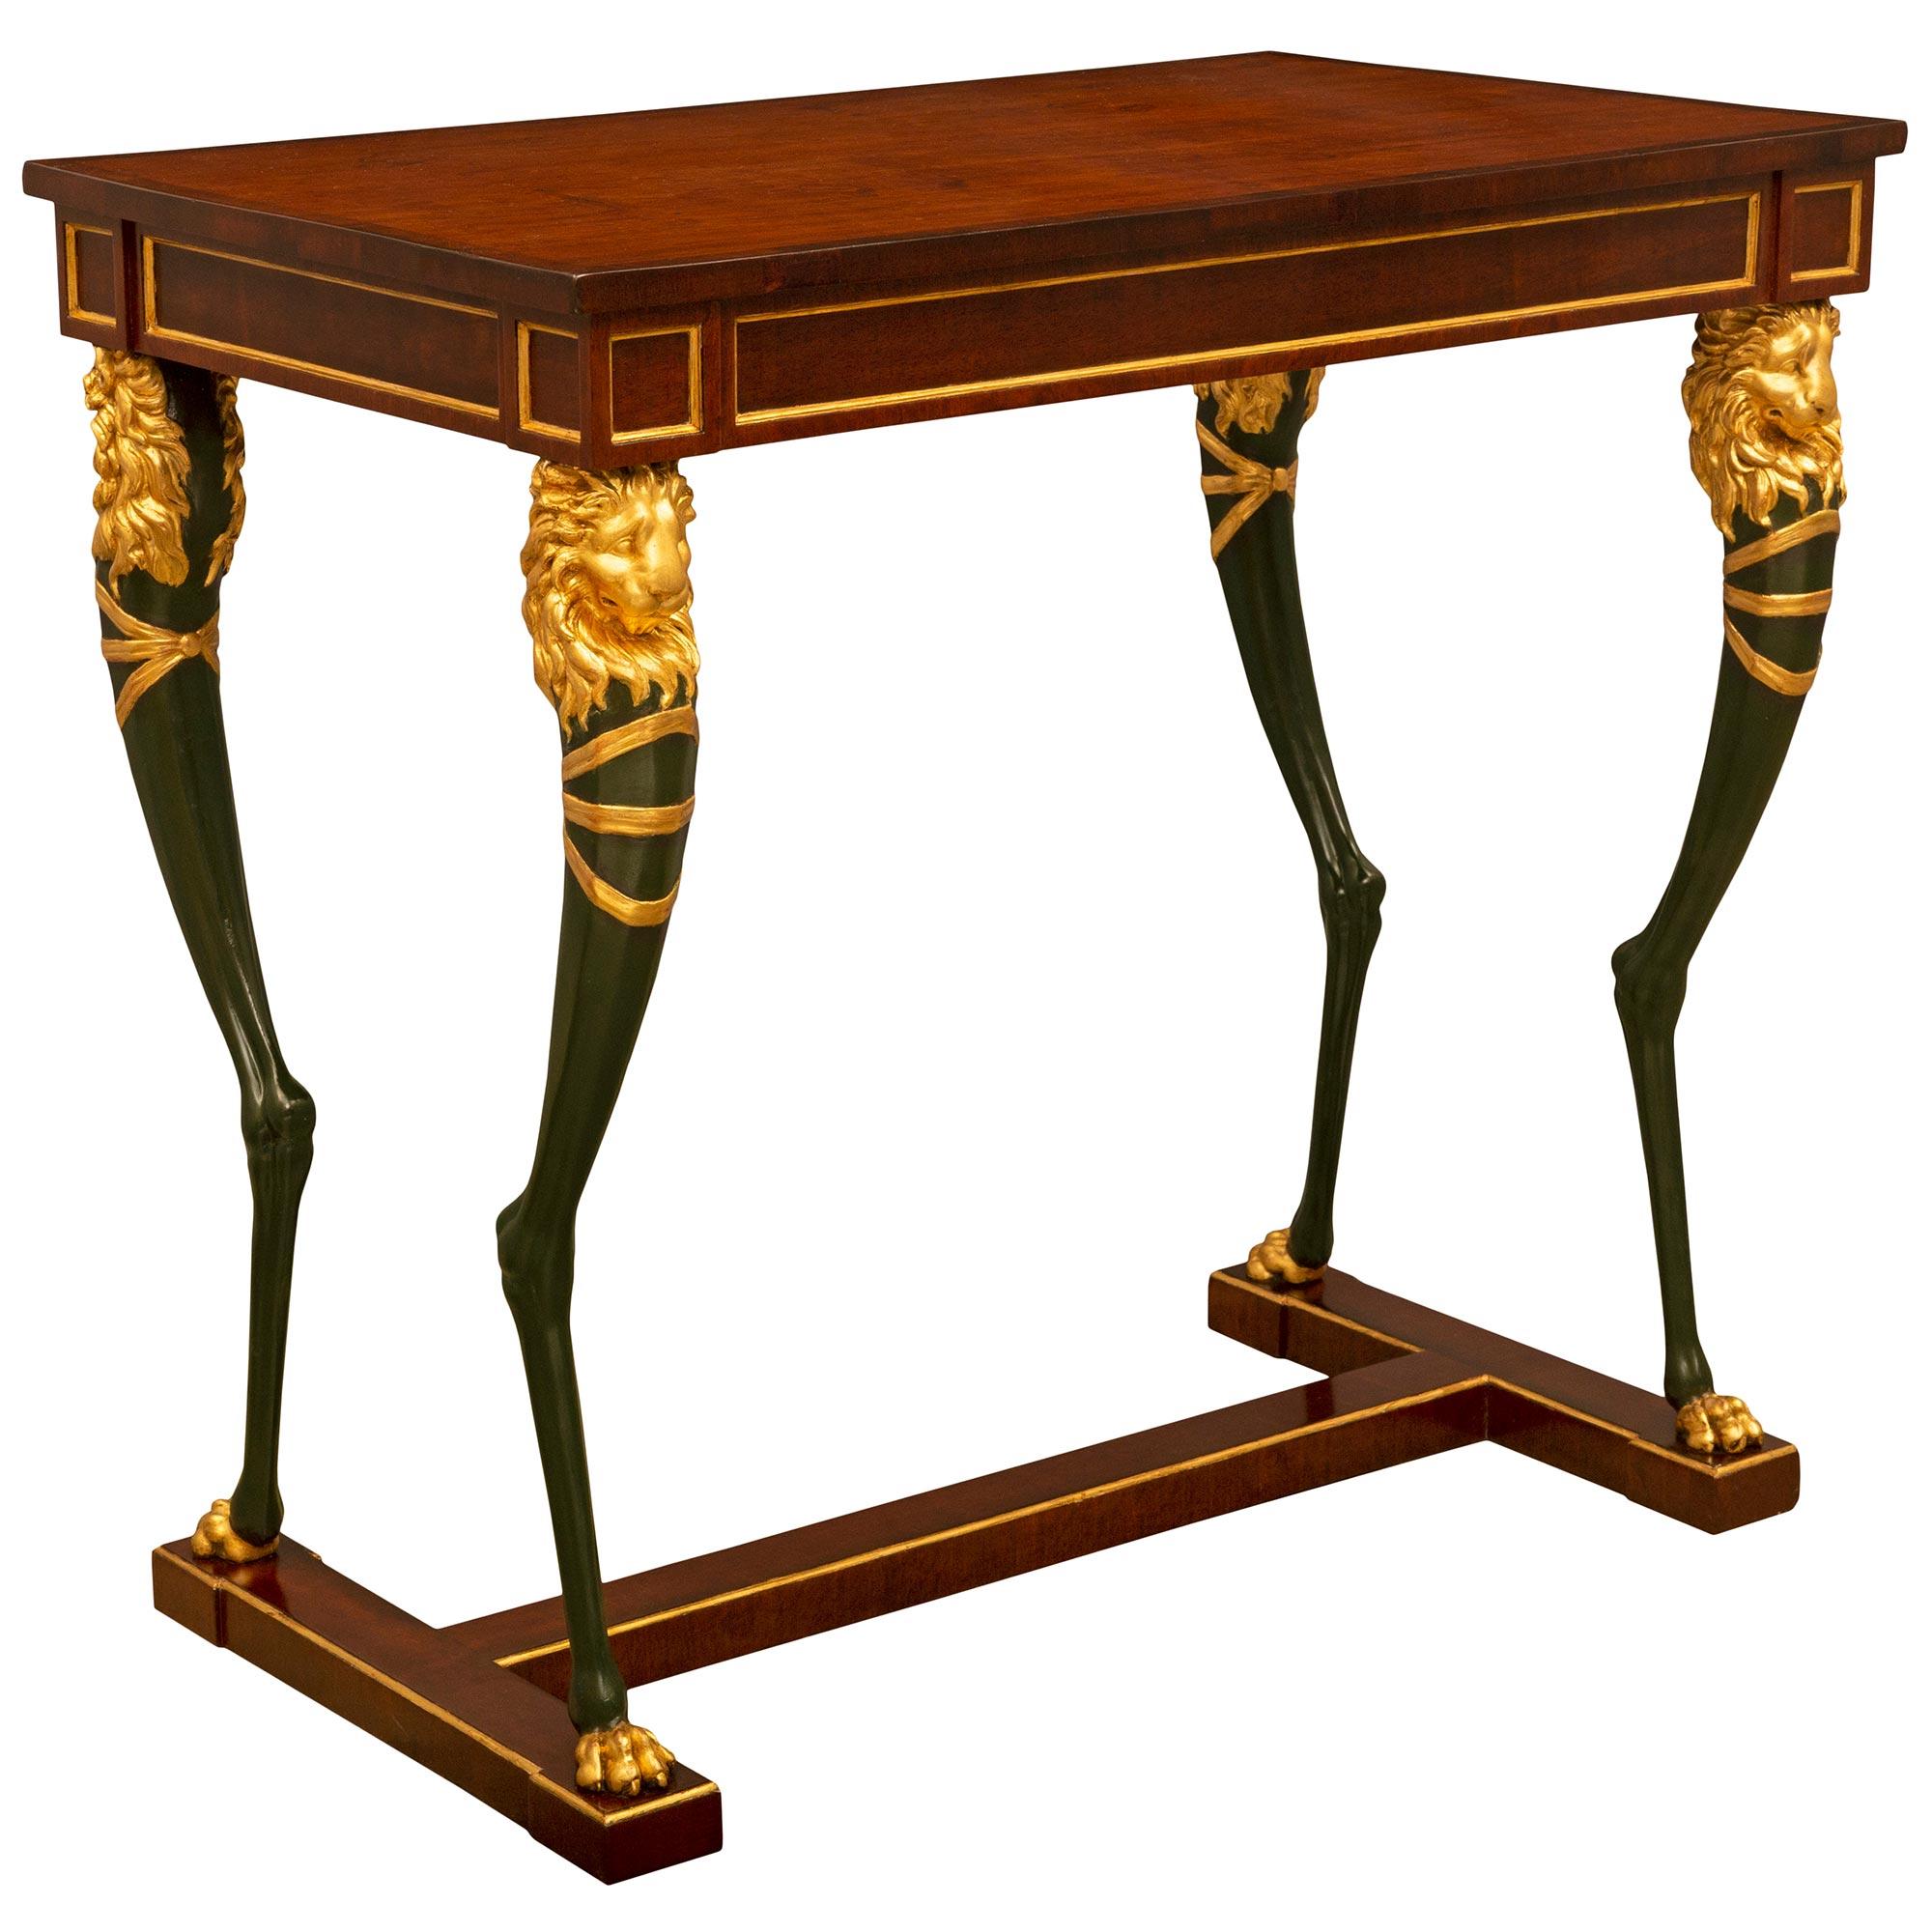 Swedish 19th Century Empire St. Mahogany, Polychrome and Giltwood Center Table In Good Condition For Sale In West Palm Beach, FL